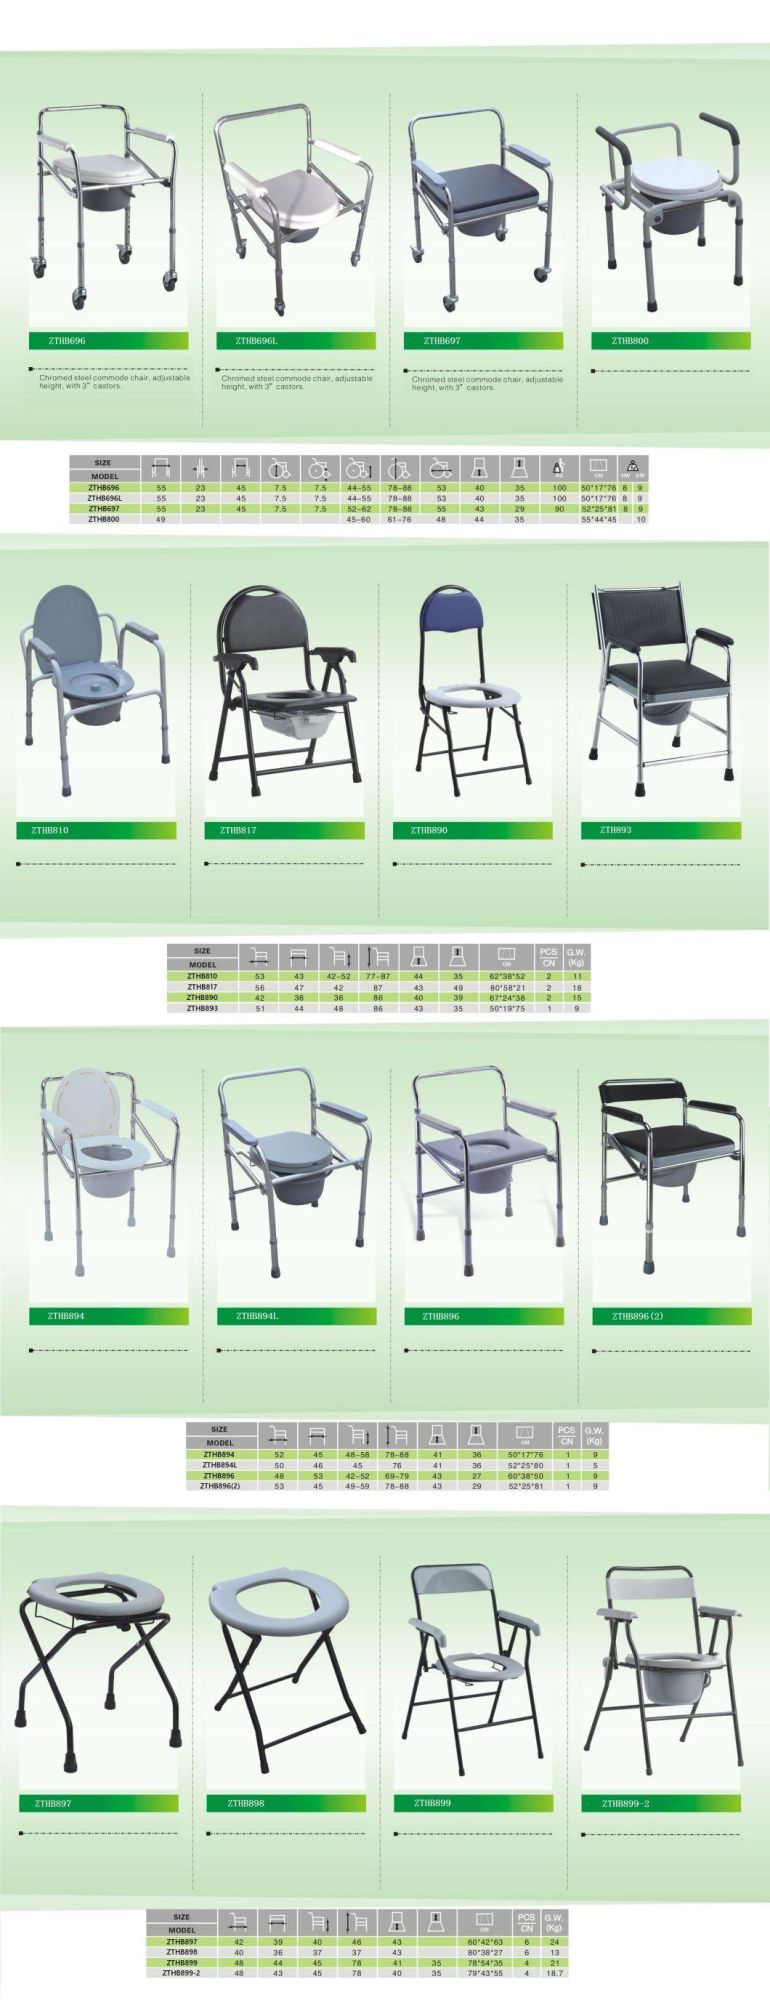 Home Care with Wheel Height Adjust Lightweight Commode Toilet Chair Elderly/Disable Patient People Rehabilitation Products Steel Nursing Safety Seat in Bathroom